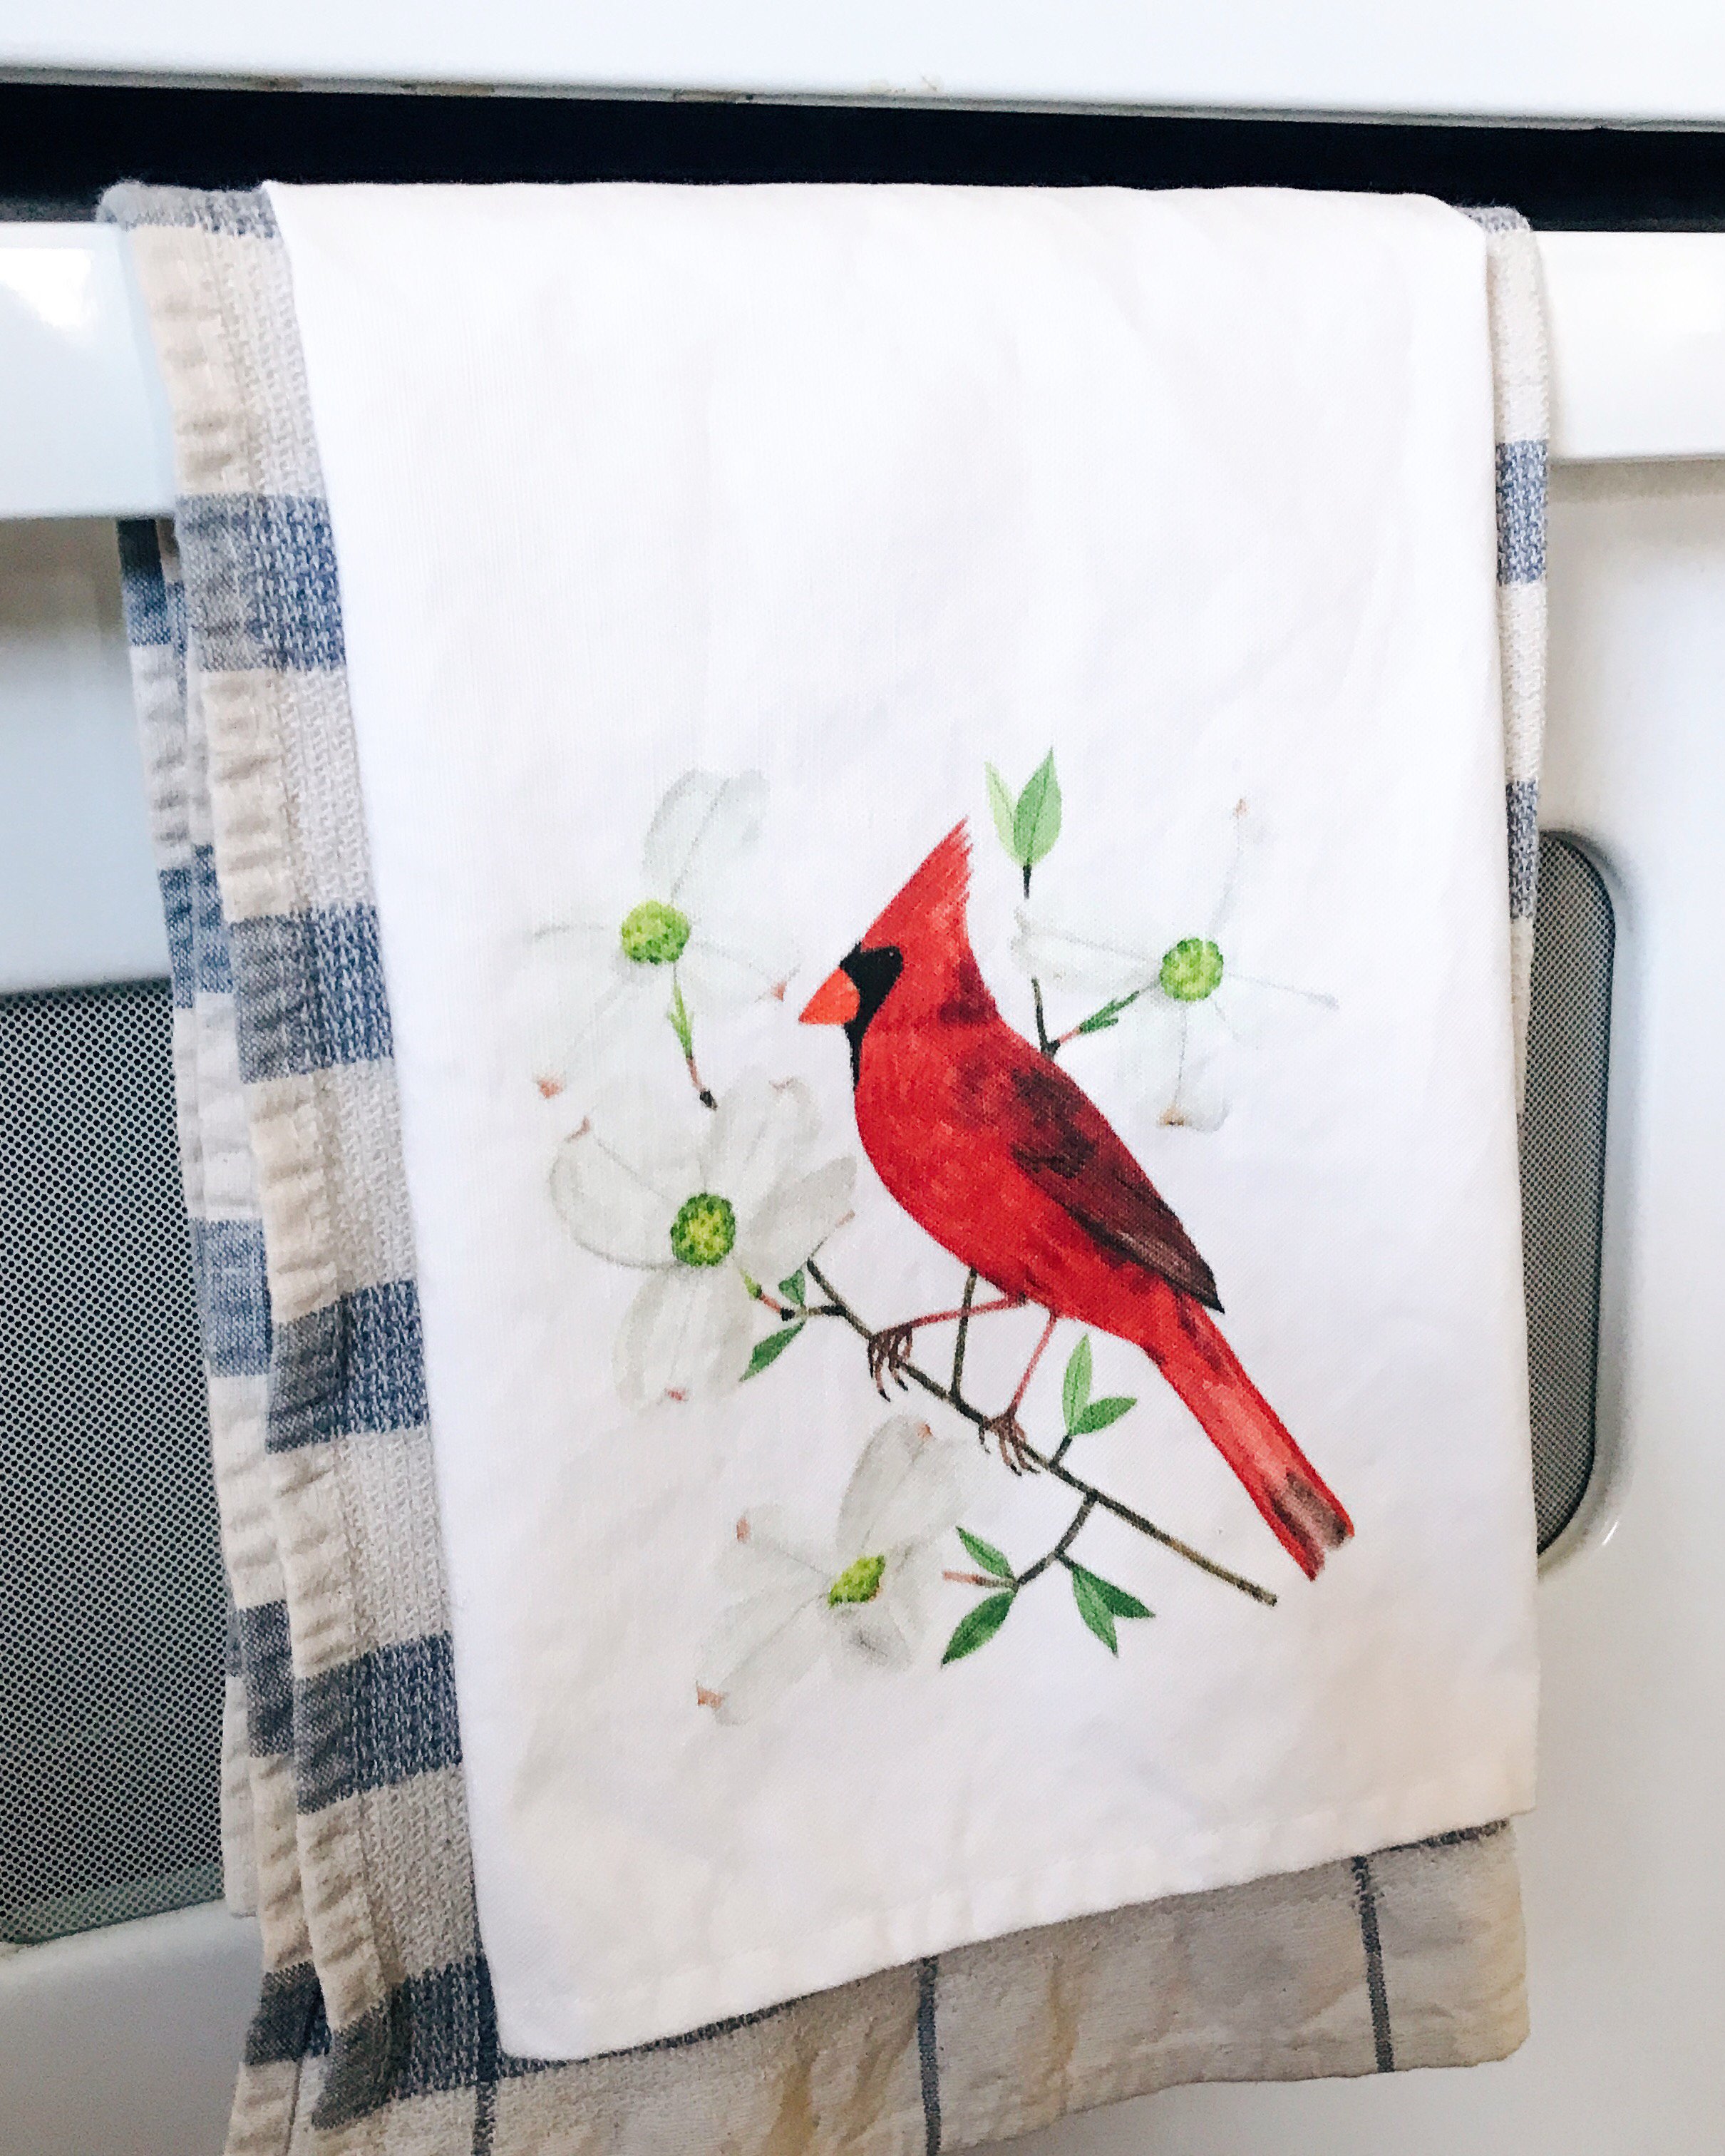 Dish Towels vs. Paper Towels: What's Better for the Environment? - Finch